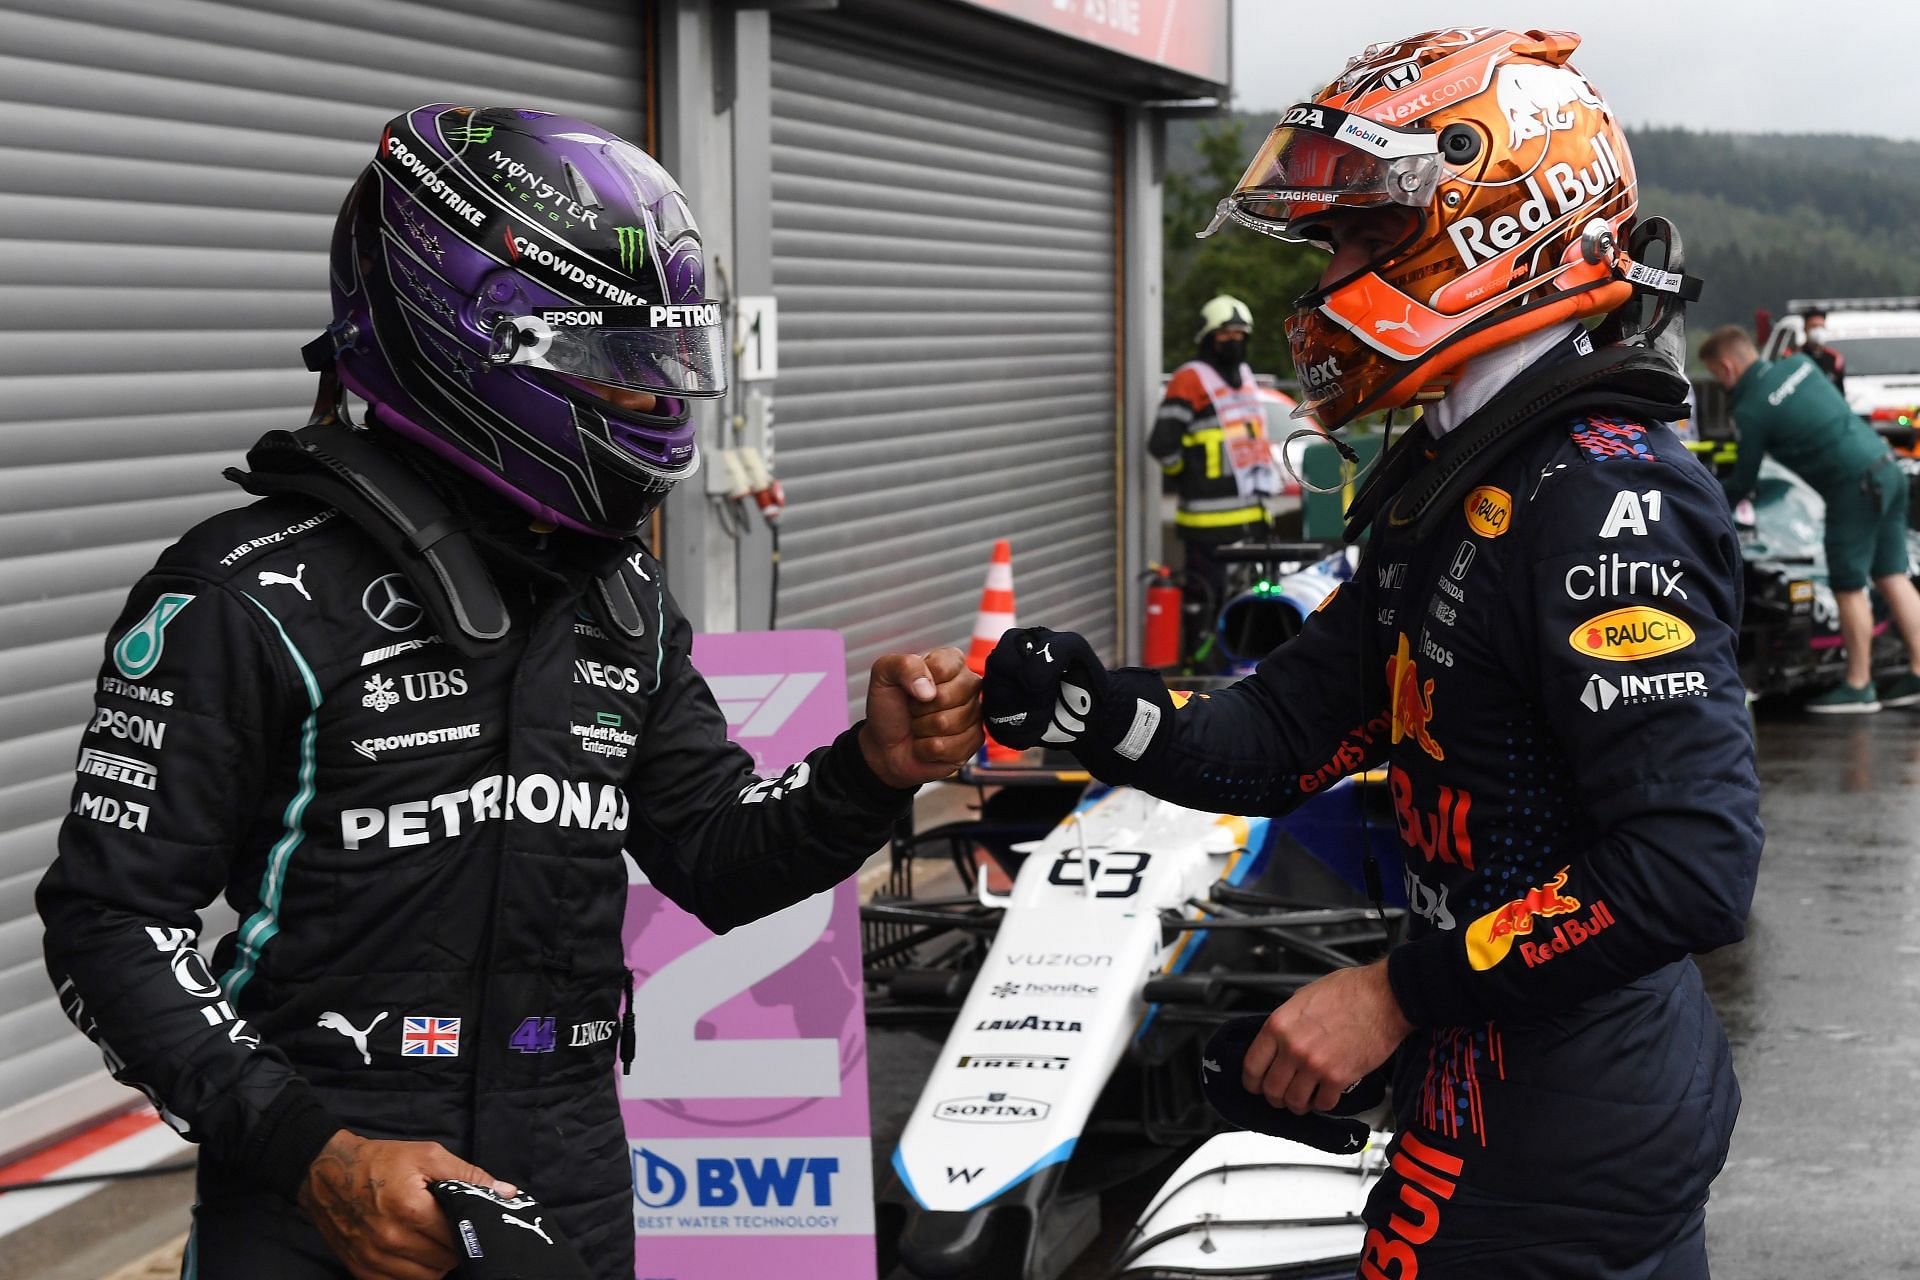 F1 Grand Prix of Belgium - Lewis Hamilton (left) and Max Verstappen (right) congratulate each other